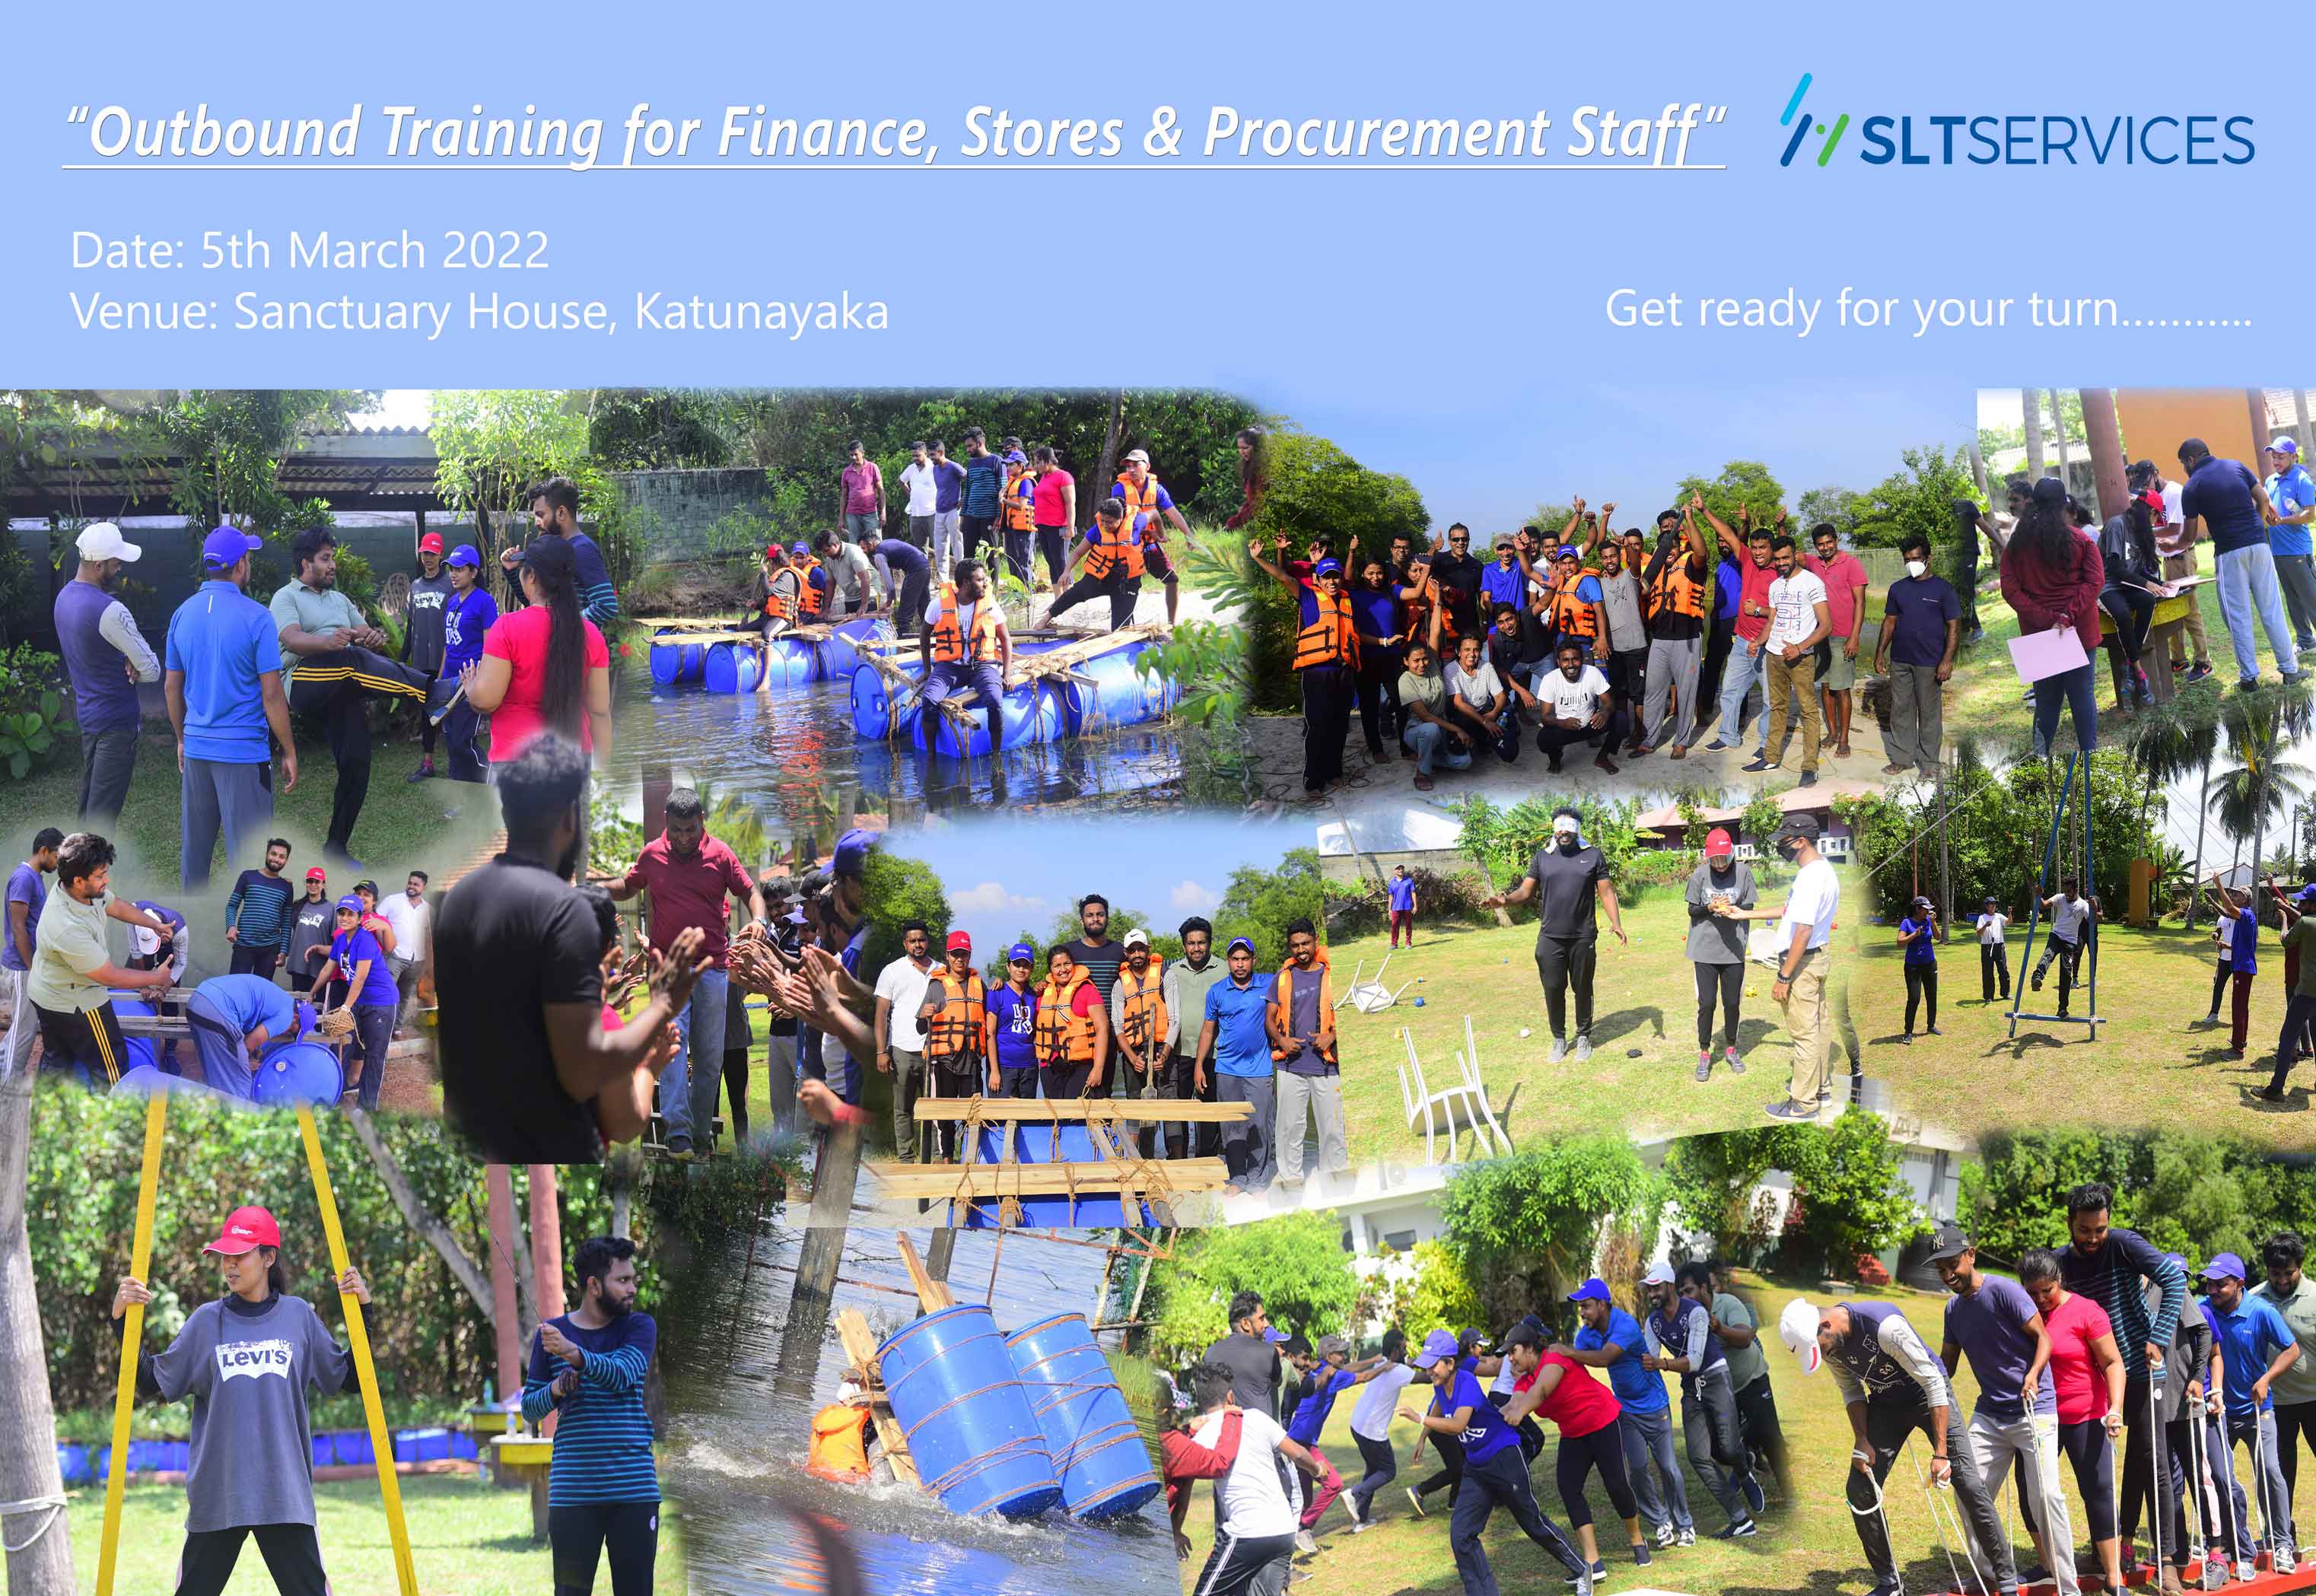 Outbound Training for Finance, Stores & Procurement Staff